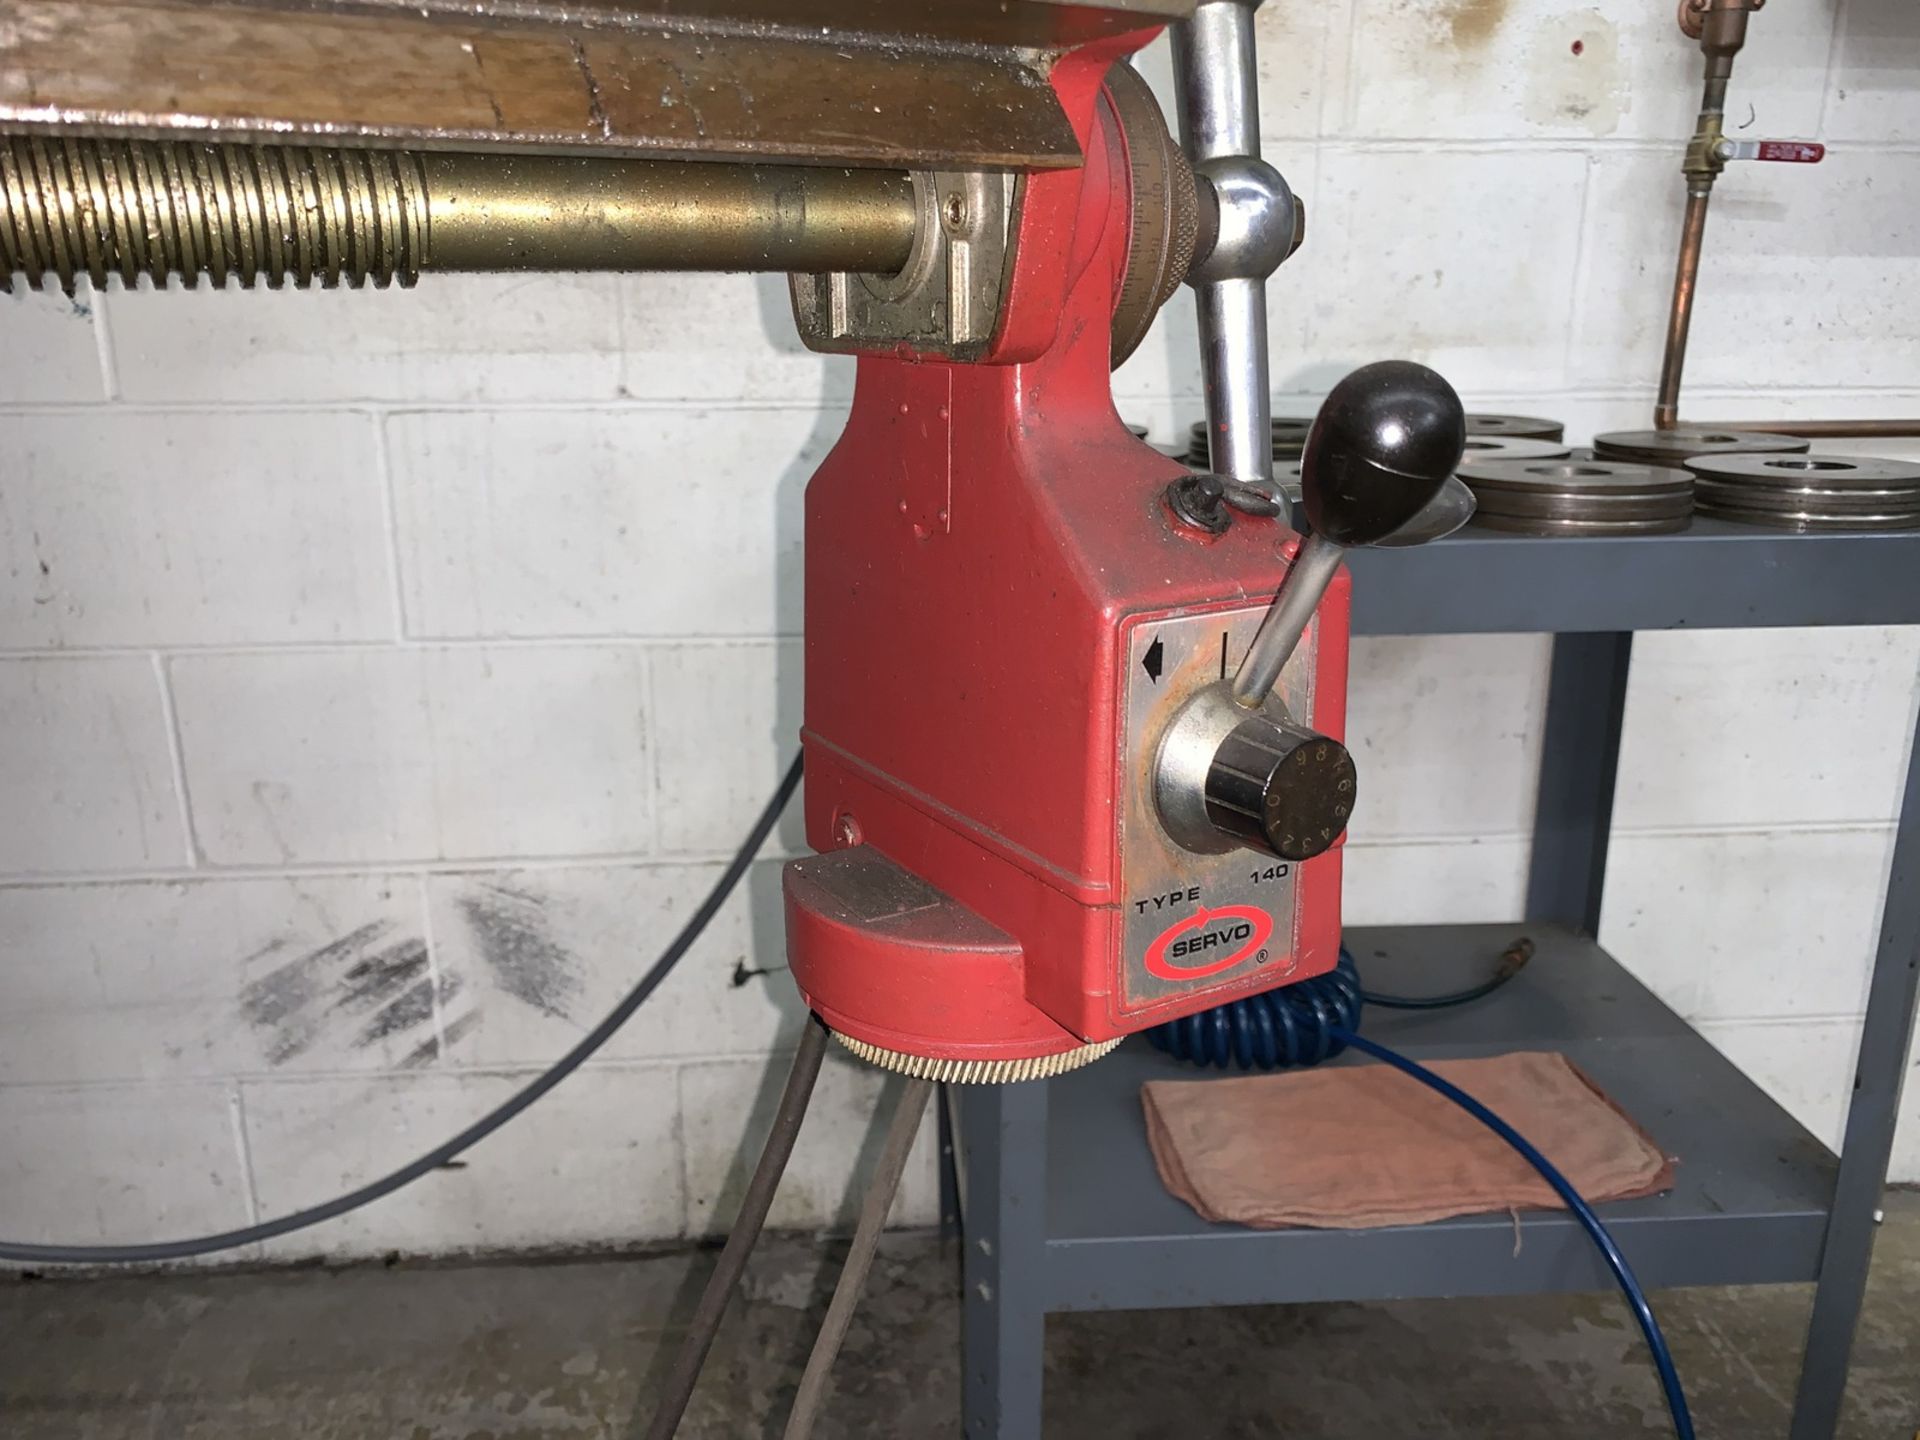 Bridgeport Vertical Milling Machine, Knee Type, 2Hp, 9" x 48" T-Slot Table with Power Cross Feed, - Image 8 of 11